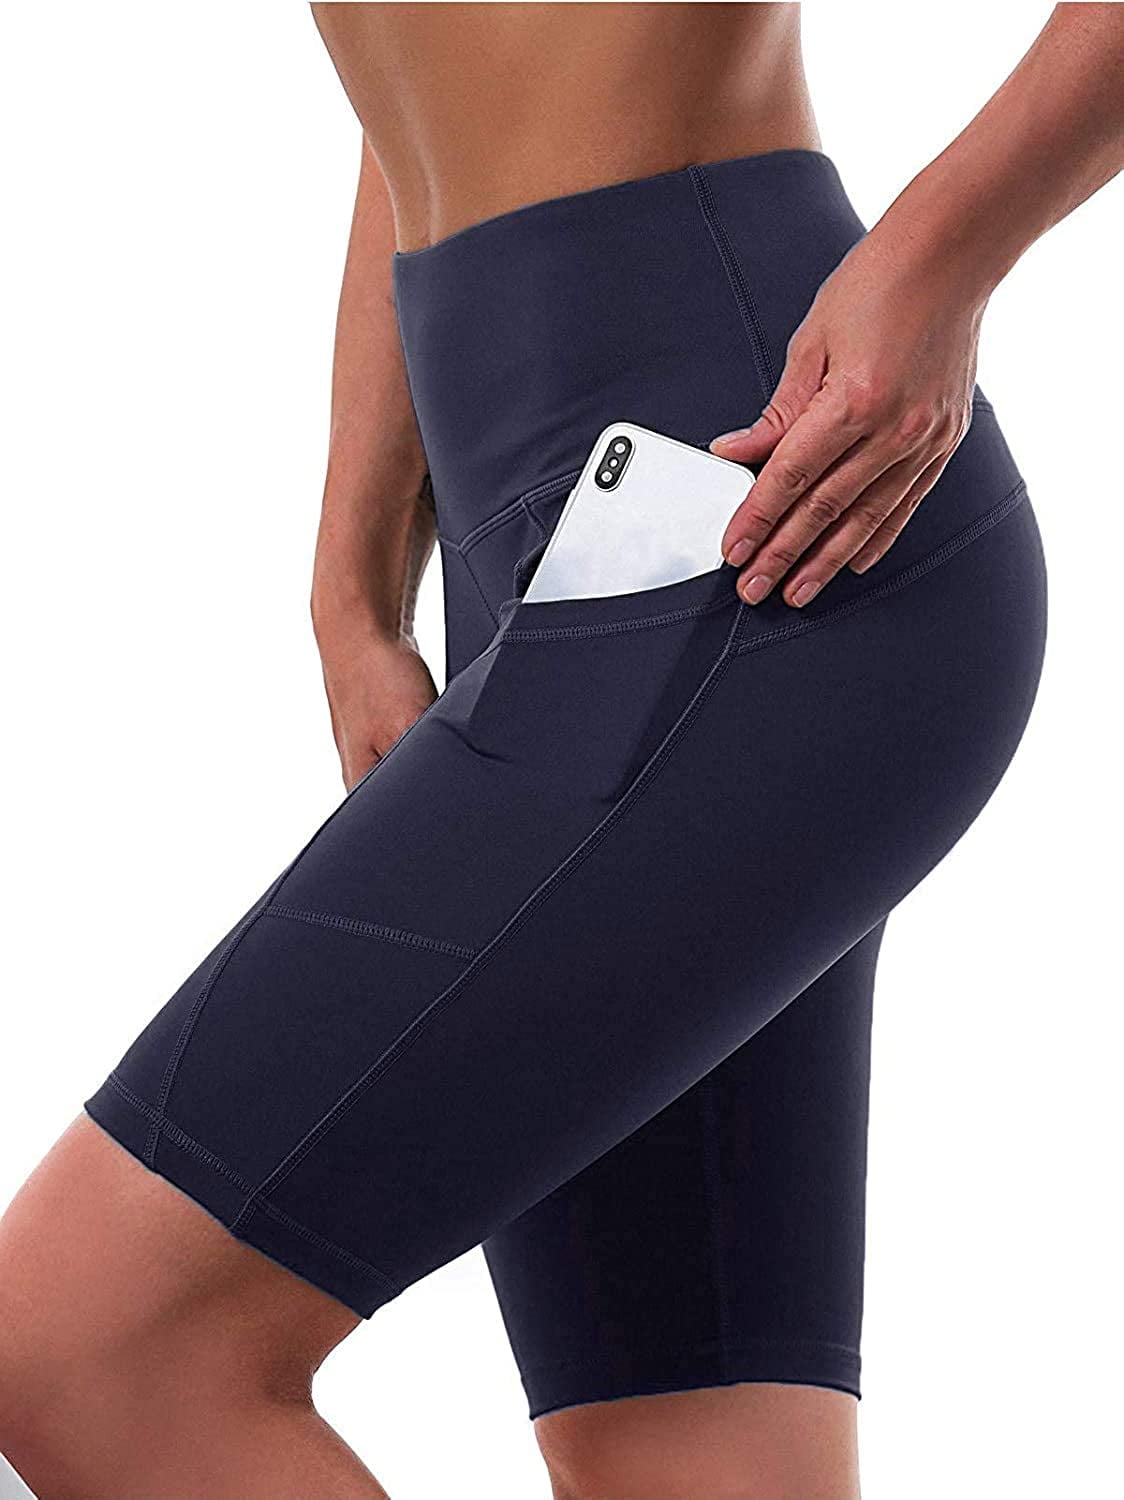 FULLSOFT Yoga Pants with Pockets for Women High Waisted Workout Tummy Control Pants for Women Pockets Leggings 